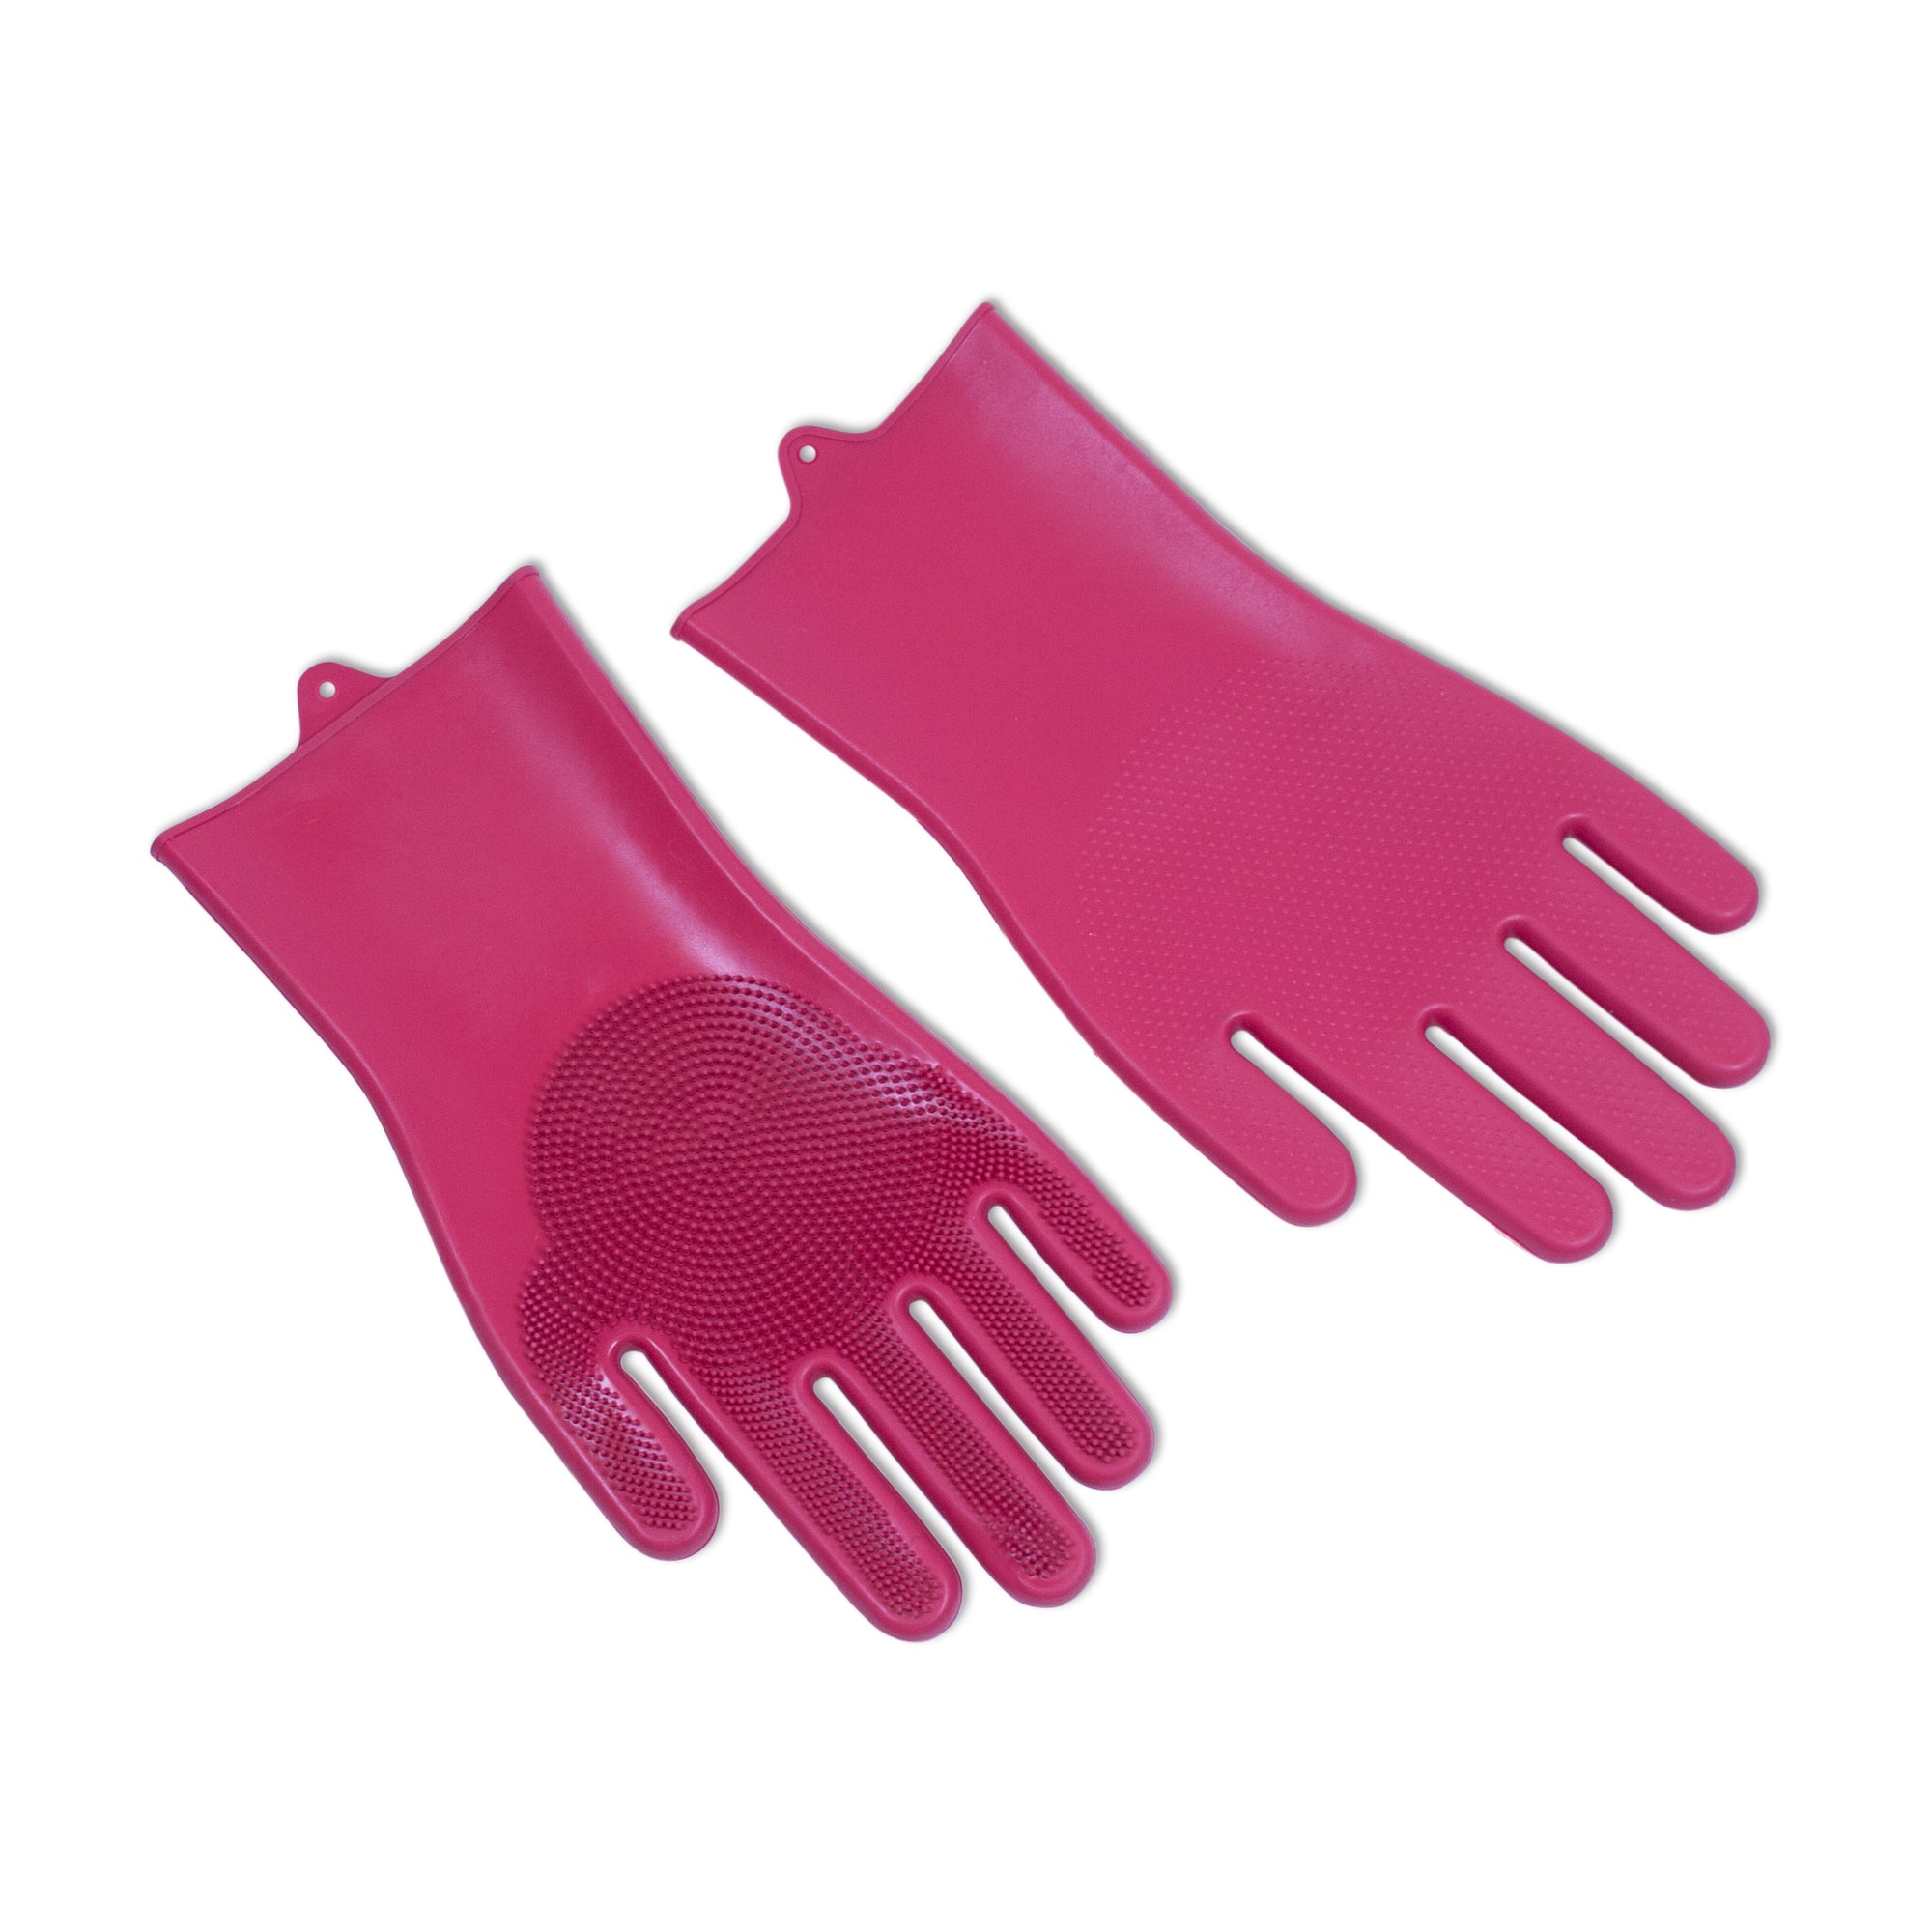 https://cdn.shopify.com/s/files/1/0446/0874/9736/products/Burgundy_gloves_isolated_HiRes_2000x.jpg?v=1638817130